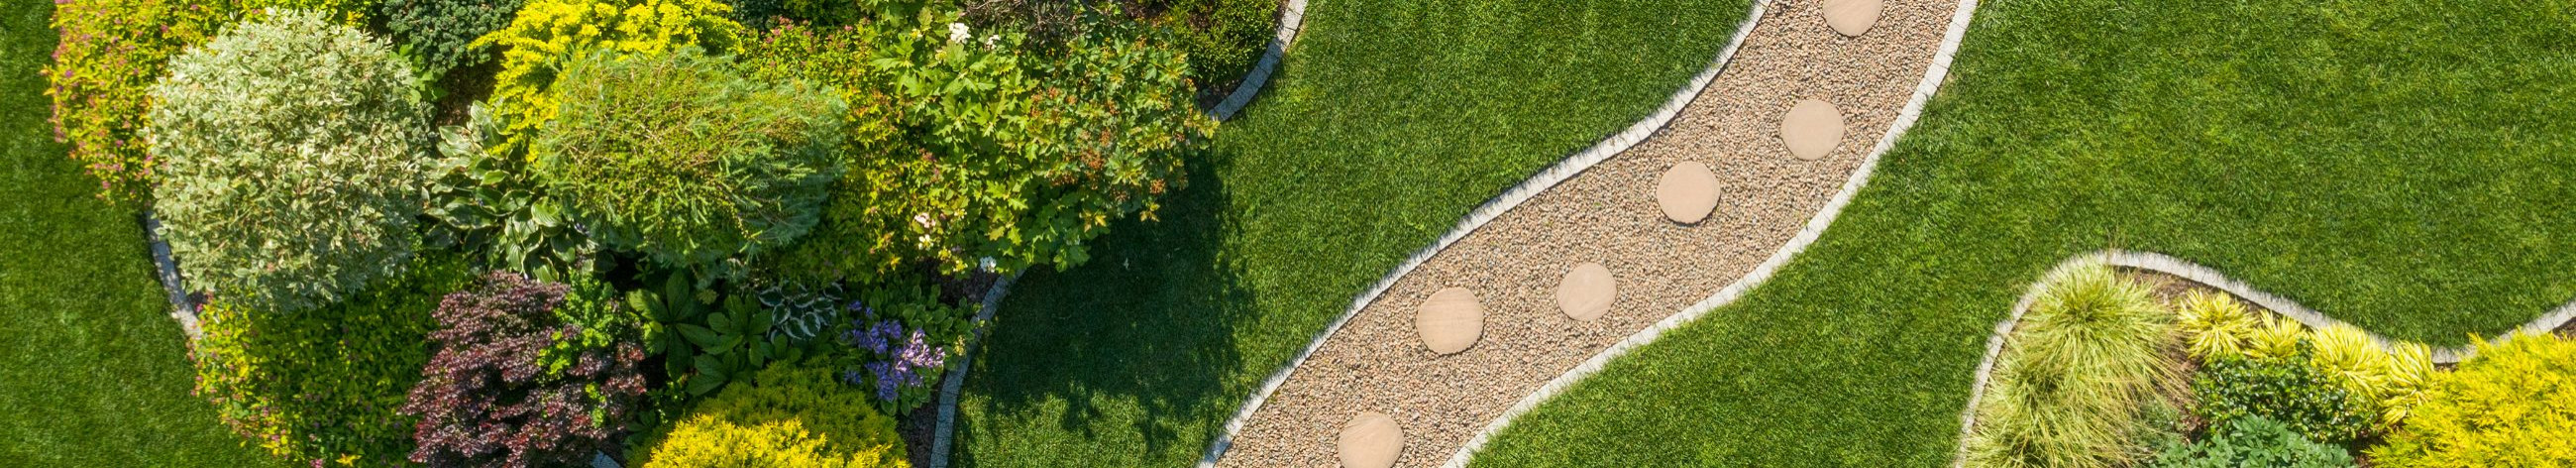 We provide comprehensive construction and landscaping services, including terrace building, roofing, and garden enhancements.